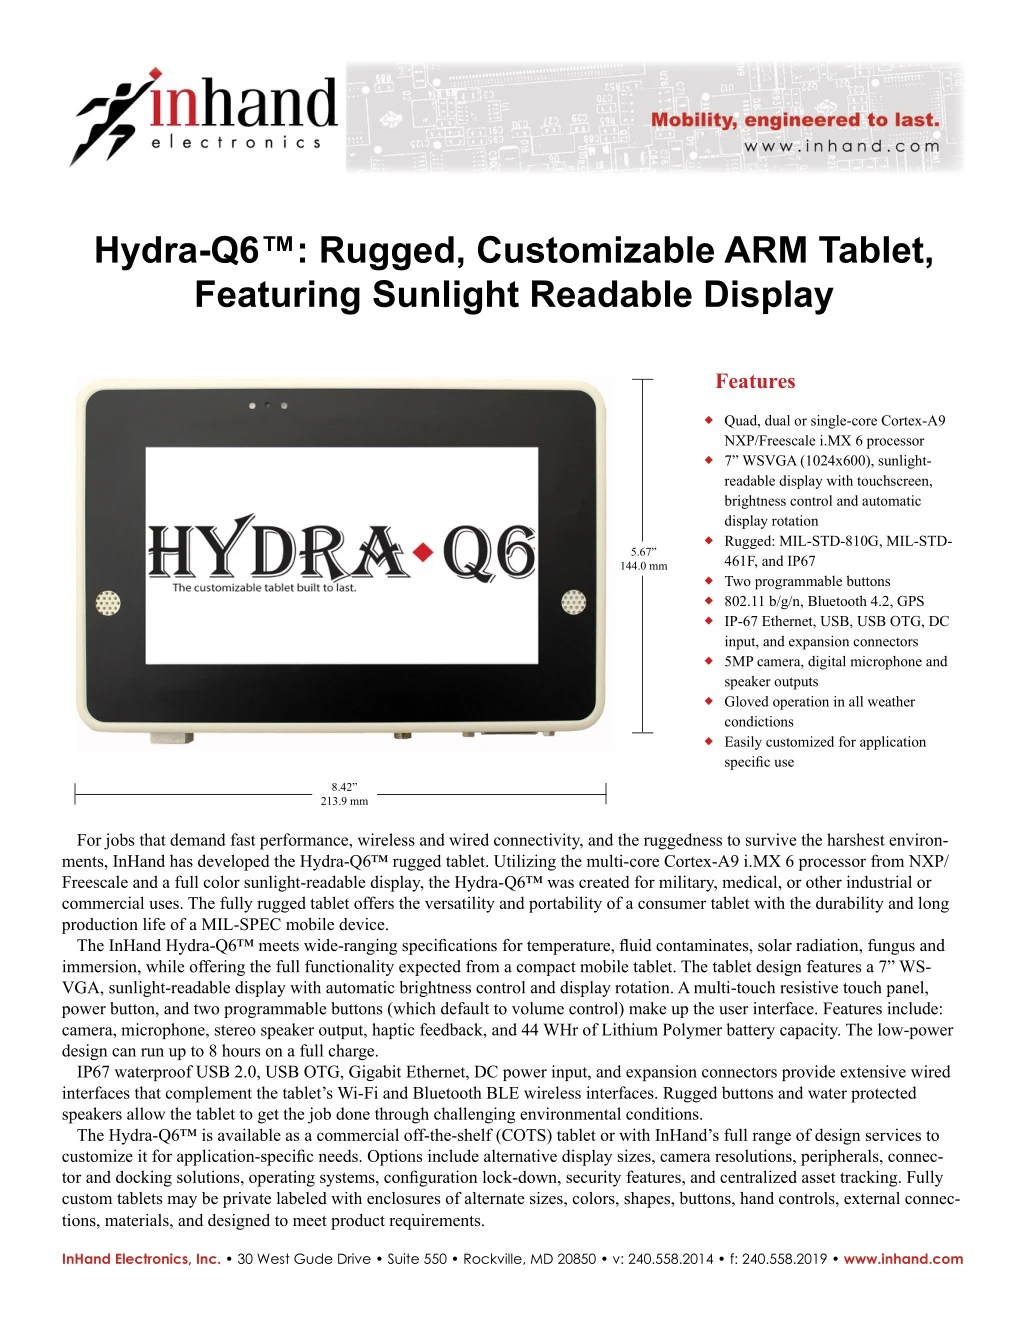 hydra q6 rugged customizable arm tablet featuring